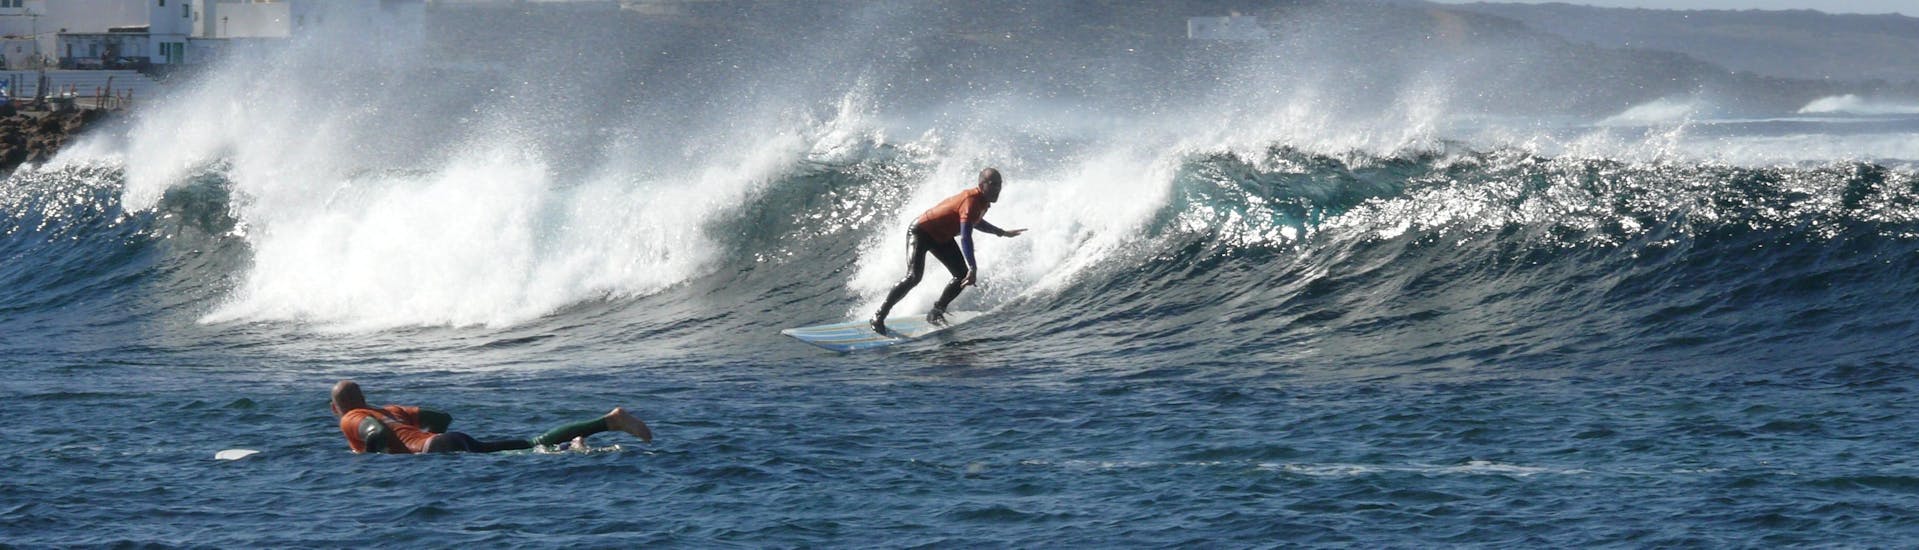 private-surfing-lessons-for-kids-and-adults-all-levels-calima-surf-lanzarote-hero